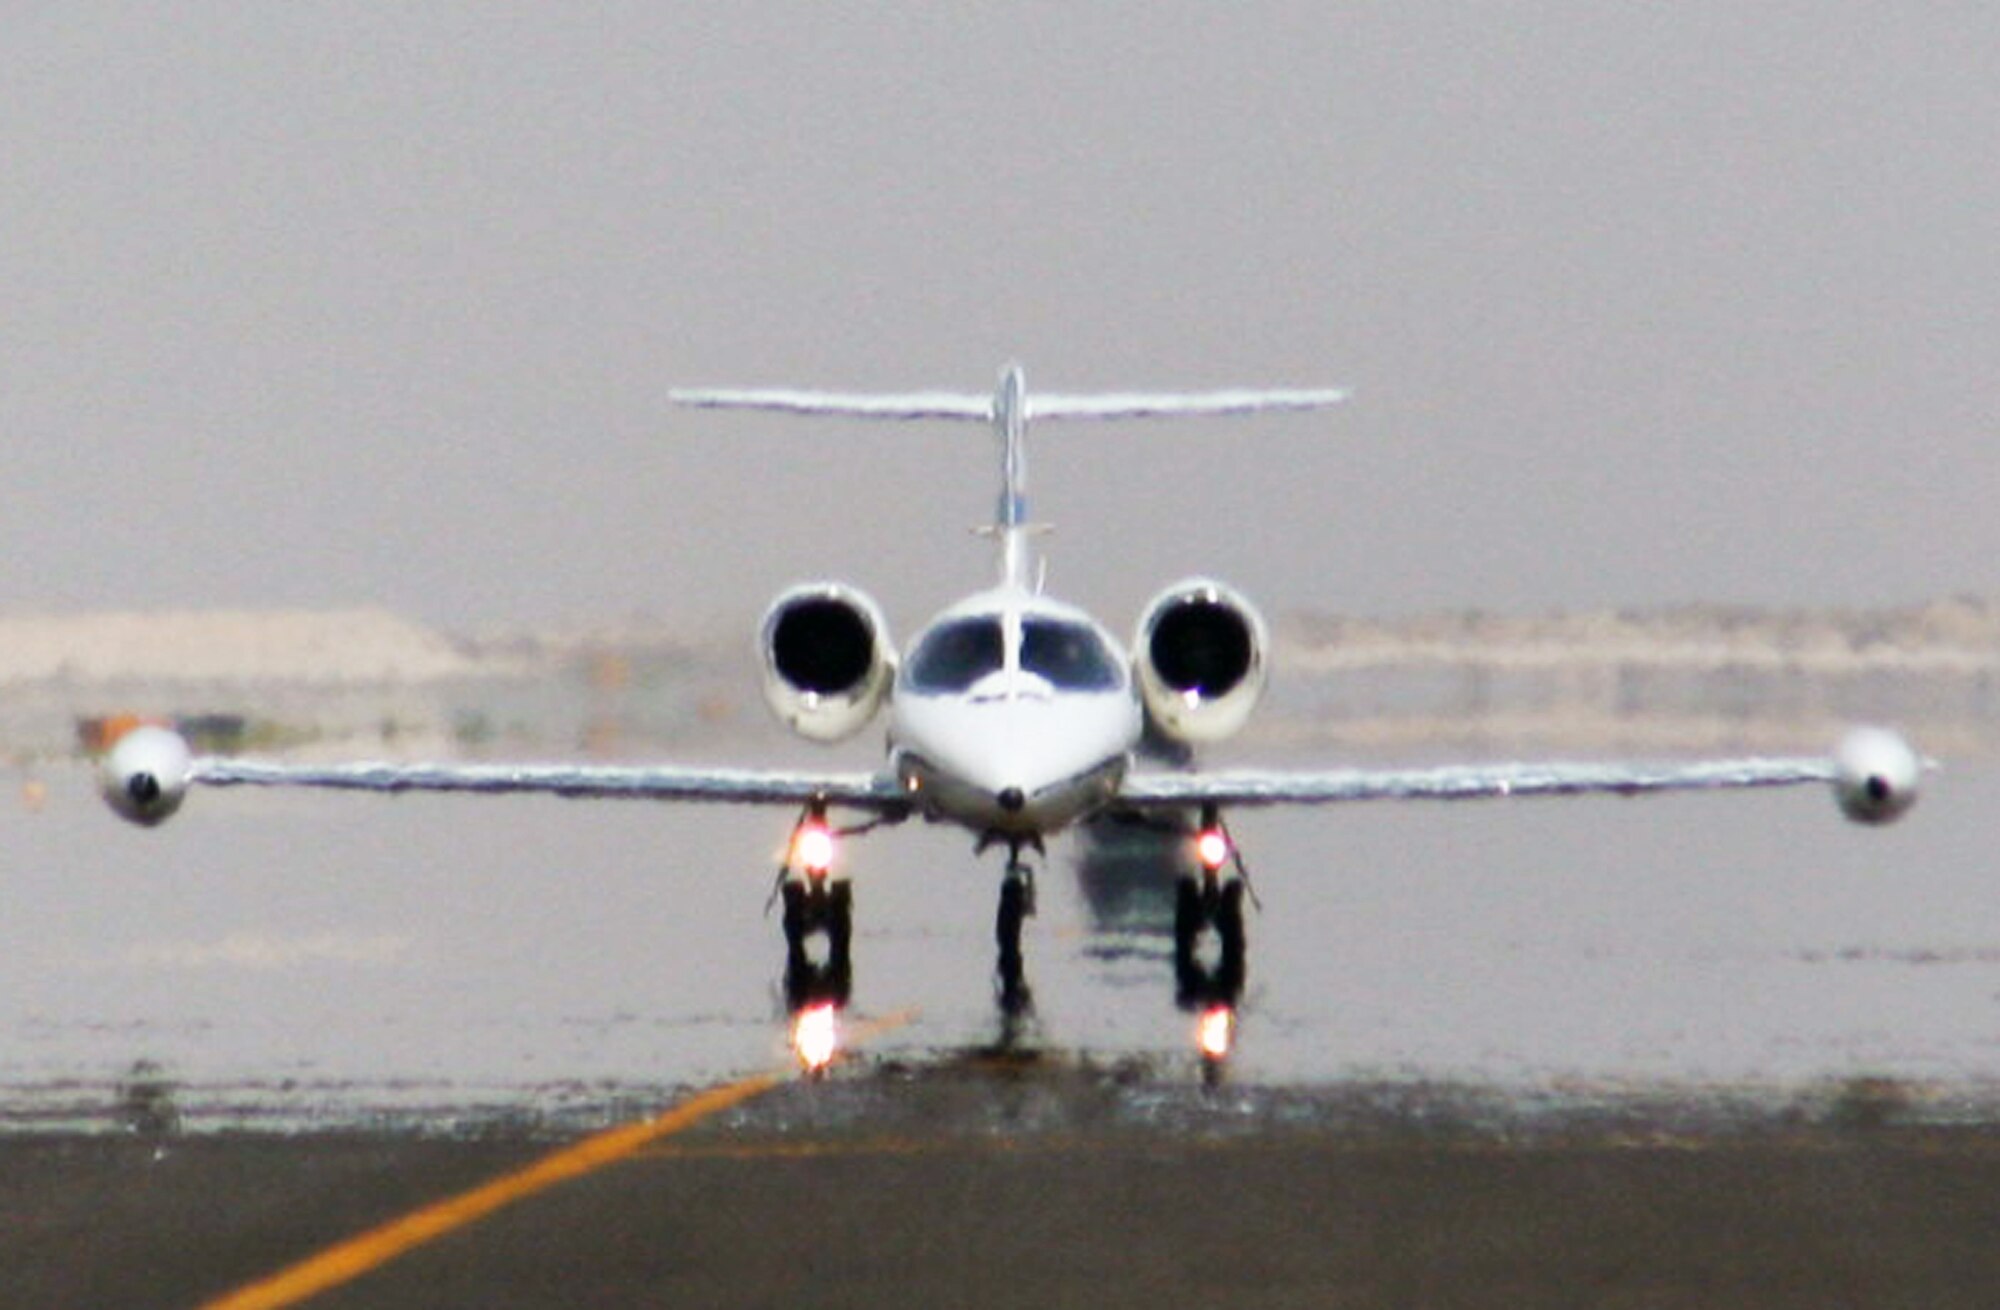 A C-21 passenger jet taxis on the runway to the flightline of the 380th Air Expeditionary Wing at a non-disclosed location in Southwest Asia on May 19, 2010.  The C-21, according to its Air Force fact sheet, is a twin turbofan engine aircraft used for cargo and passenger airlift. The aircraft is the military version of the Lear Jet 35A business jet. In addition to providing cargo and passenger airlift, the aircraft is capable of transporting one litter or five ambulatory patients during aeromedical evacuations. The C-21 can carry eight passengers and 42 cubic feet (1.26 cubic meters) of cargo. (U.S. Air Force Photo/Master Sgt. Scott T. Sturkol/Released)